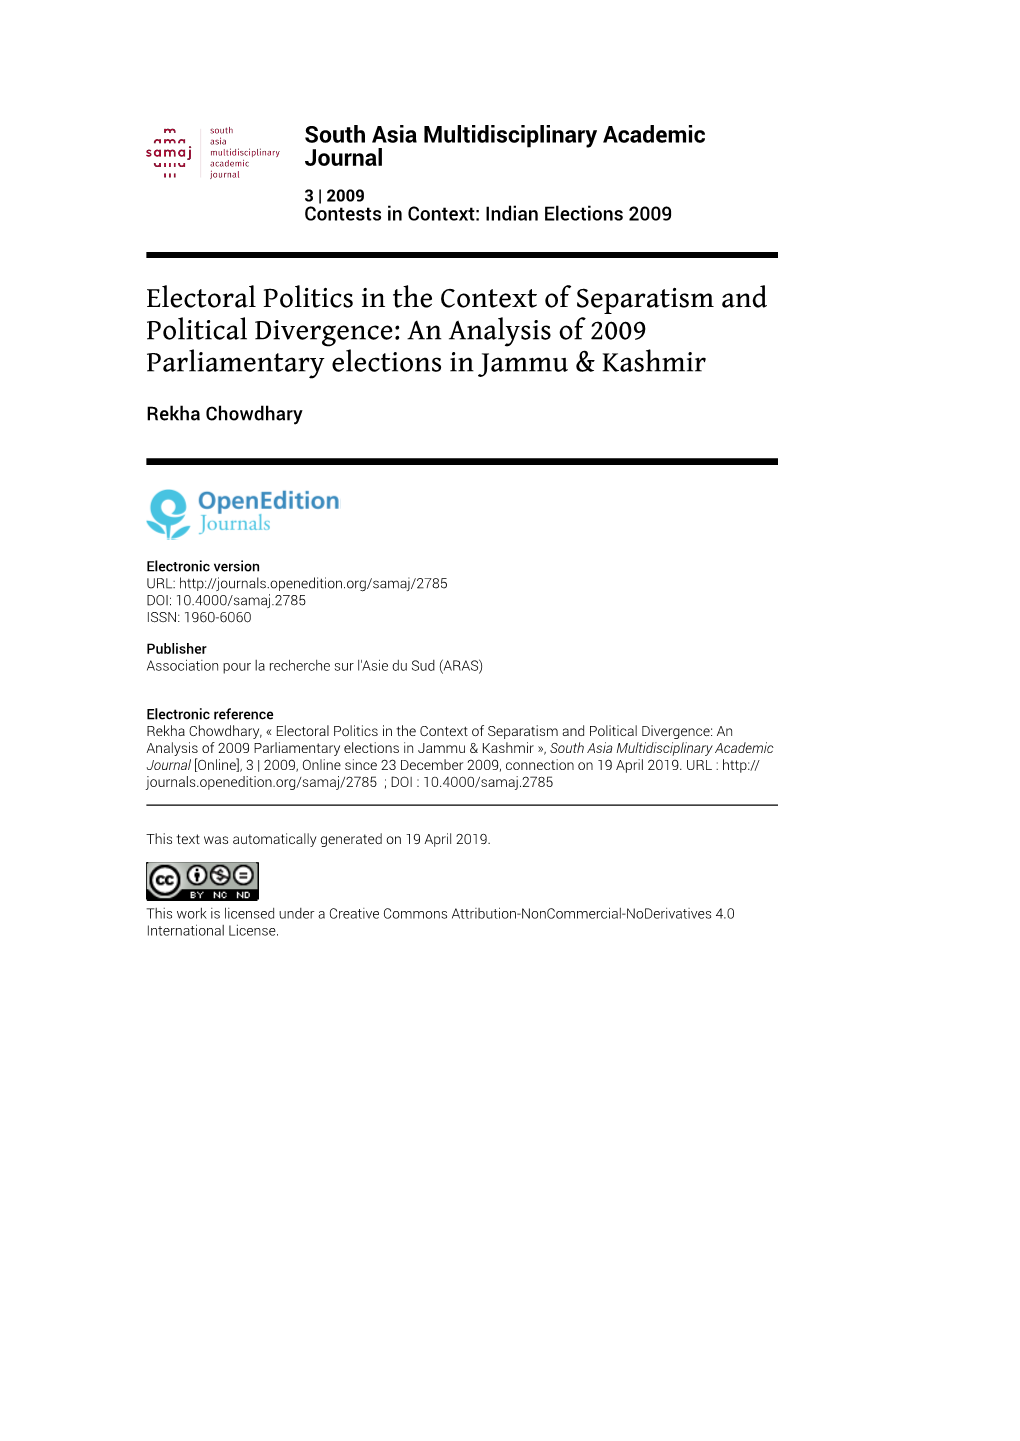 South Asia Multidisciplinary Academic Journal, 3 | 2009 Electoral Politics in the Context of Separatism and Political Divergence: an